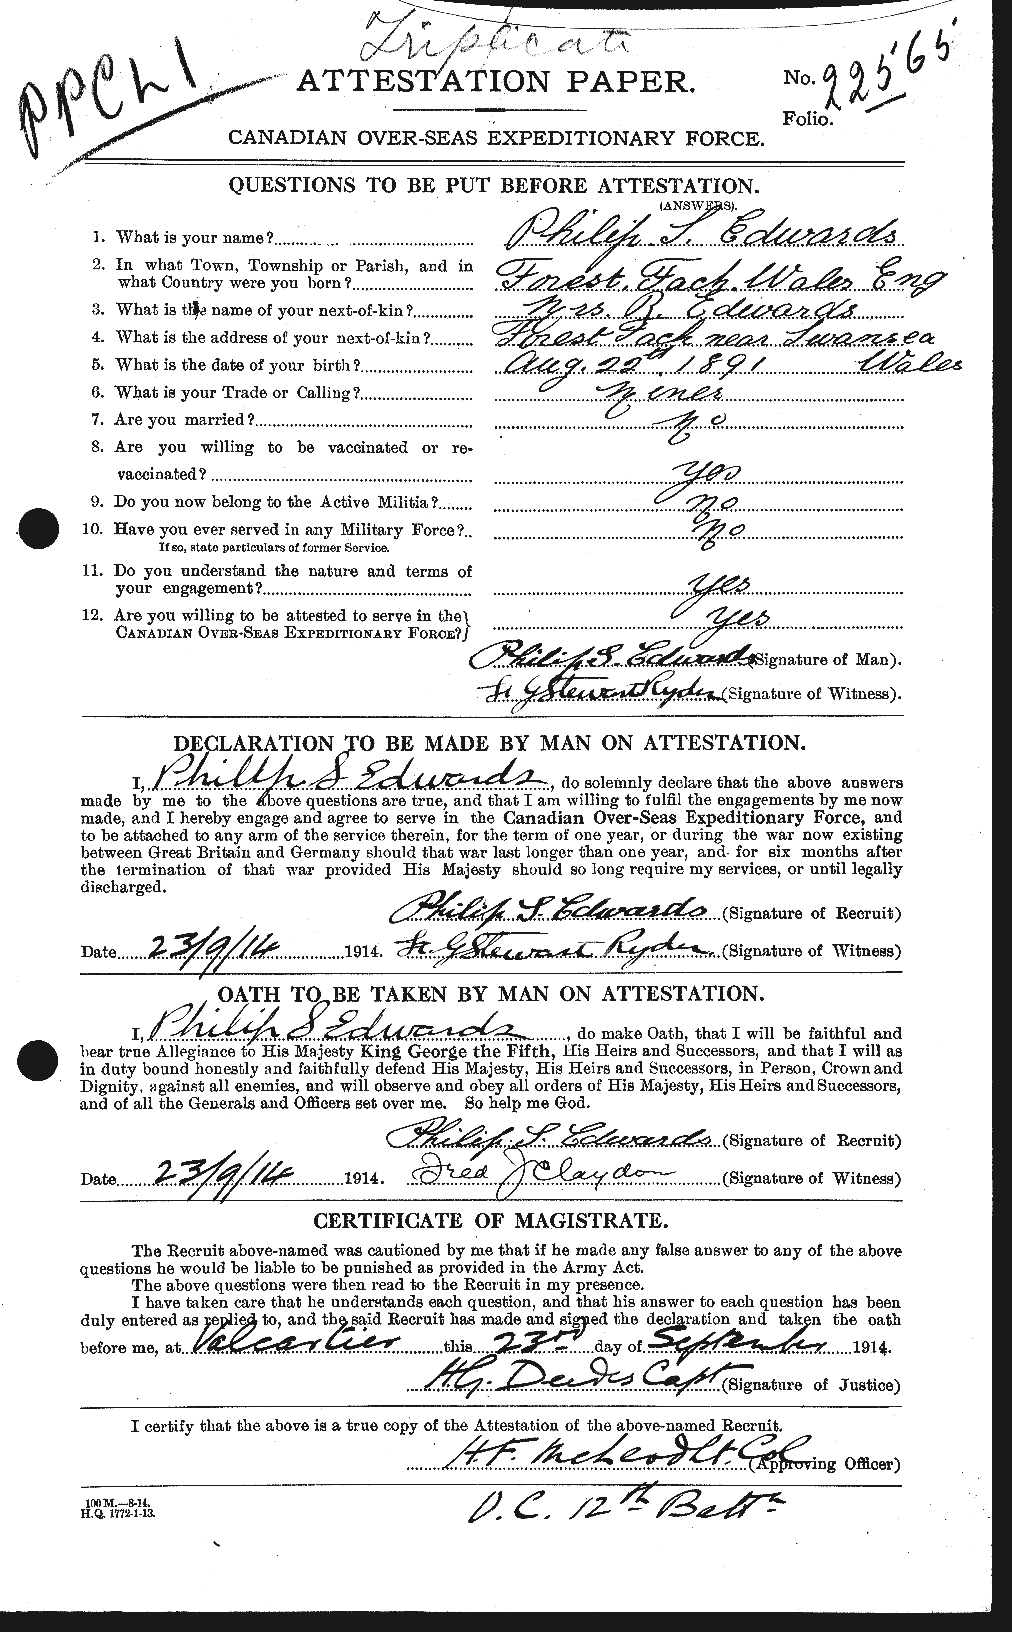 Personnel Records of the First World War - CEF 310242a